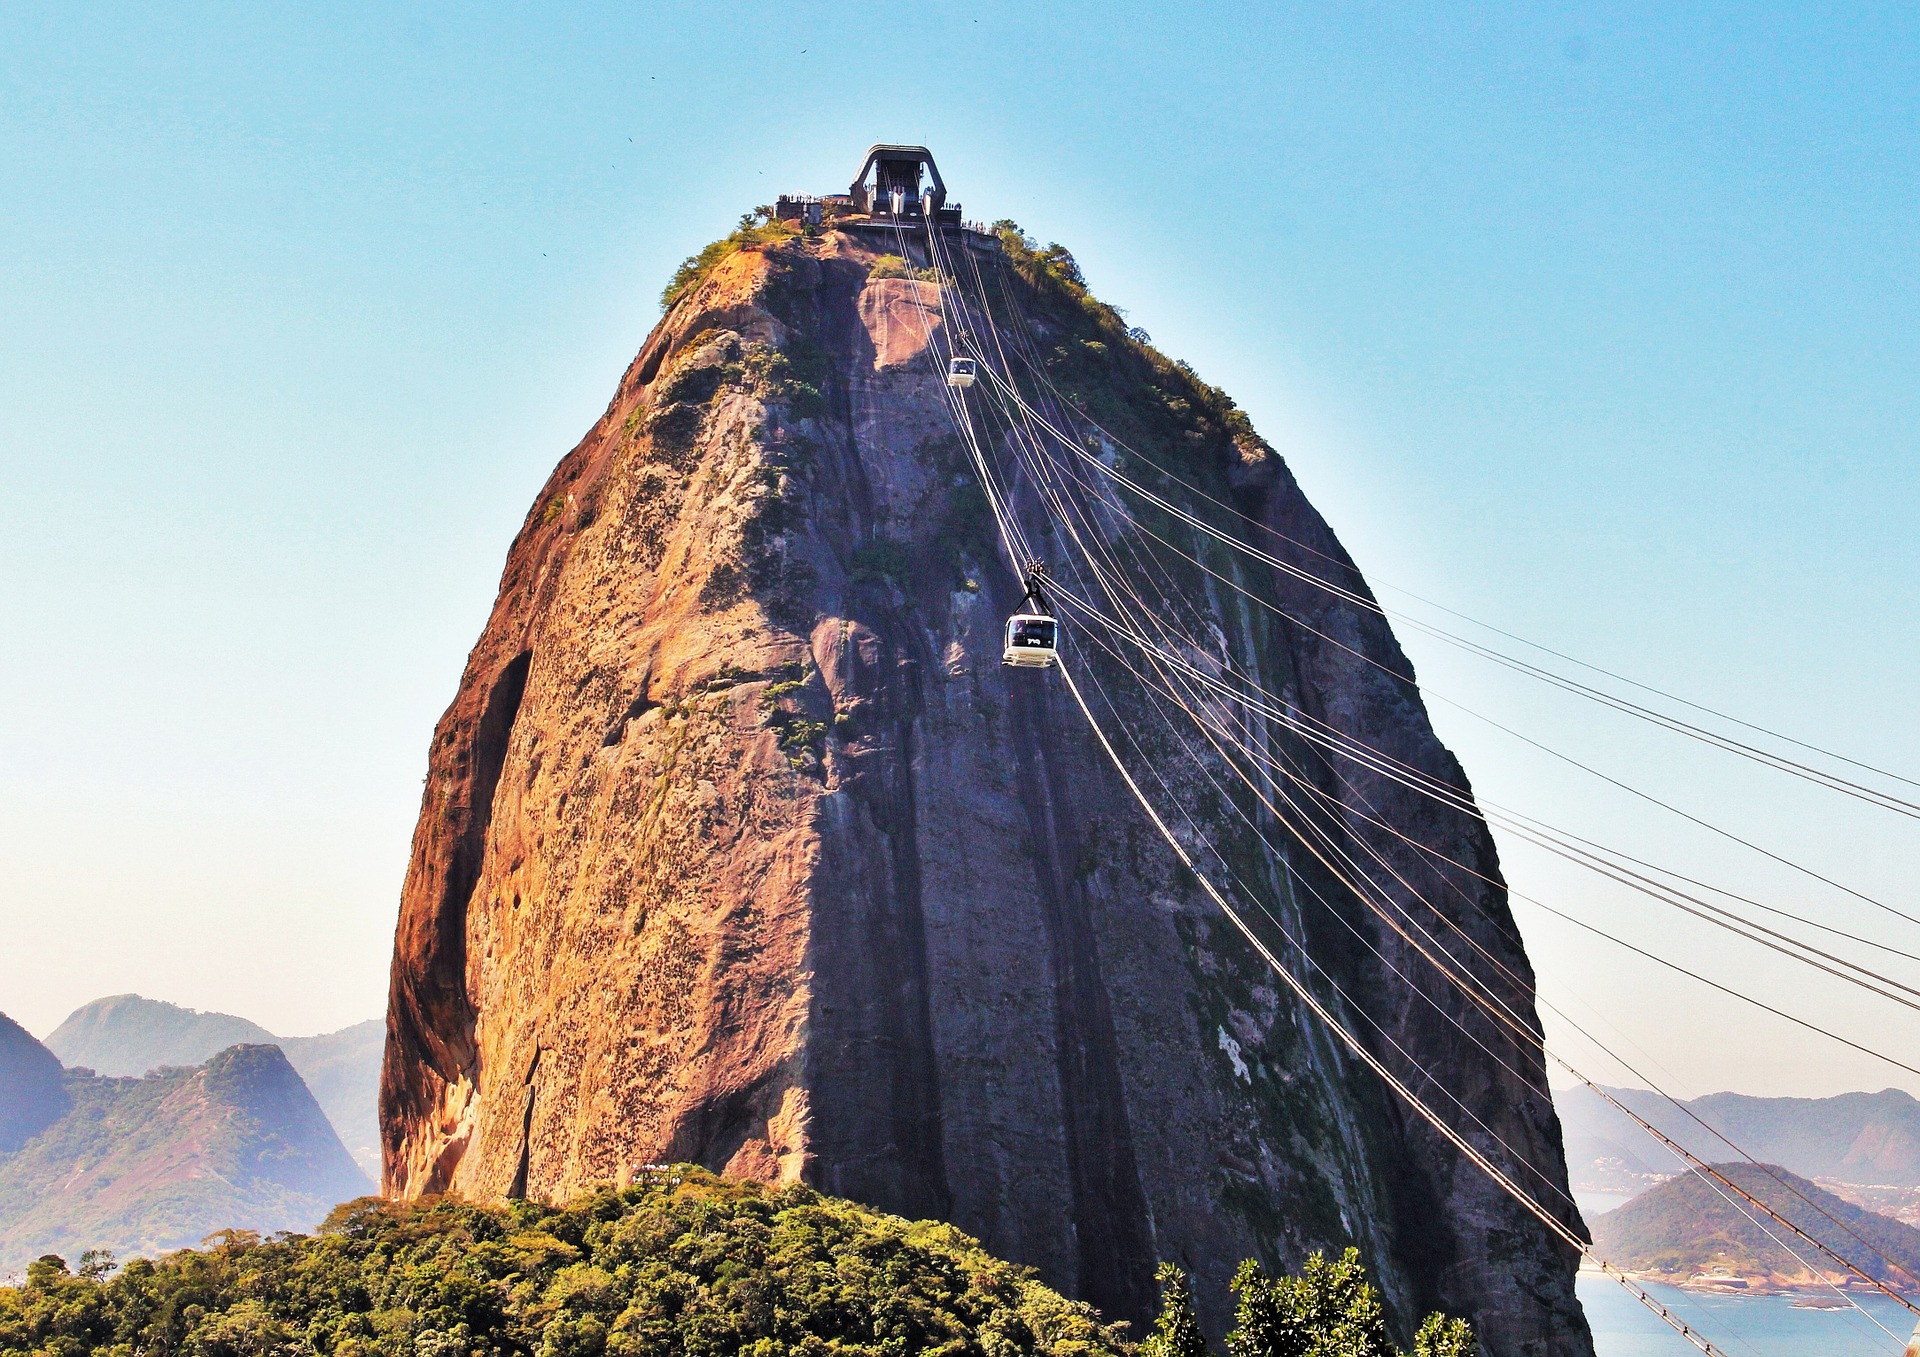 What to see in Rio de Janeiro